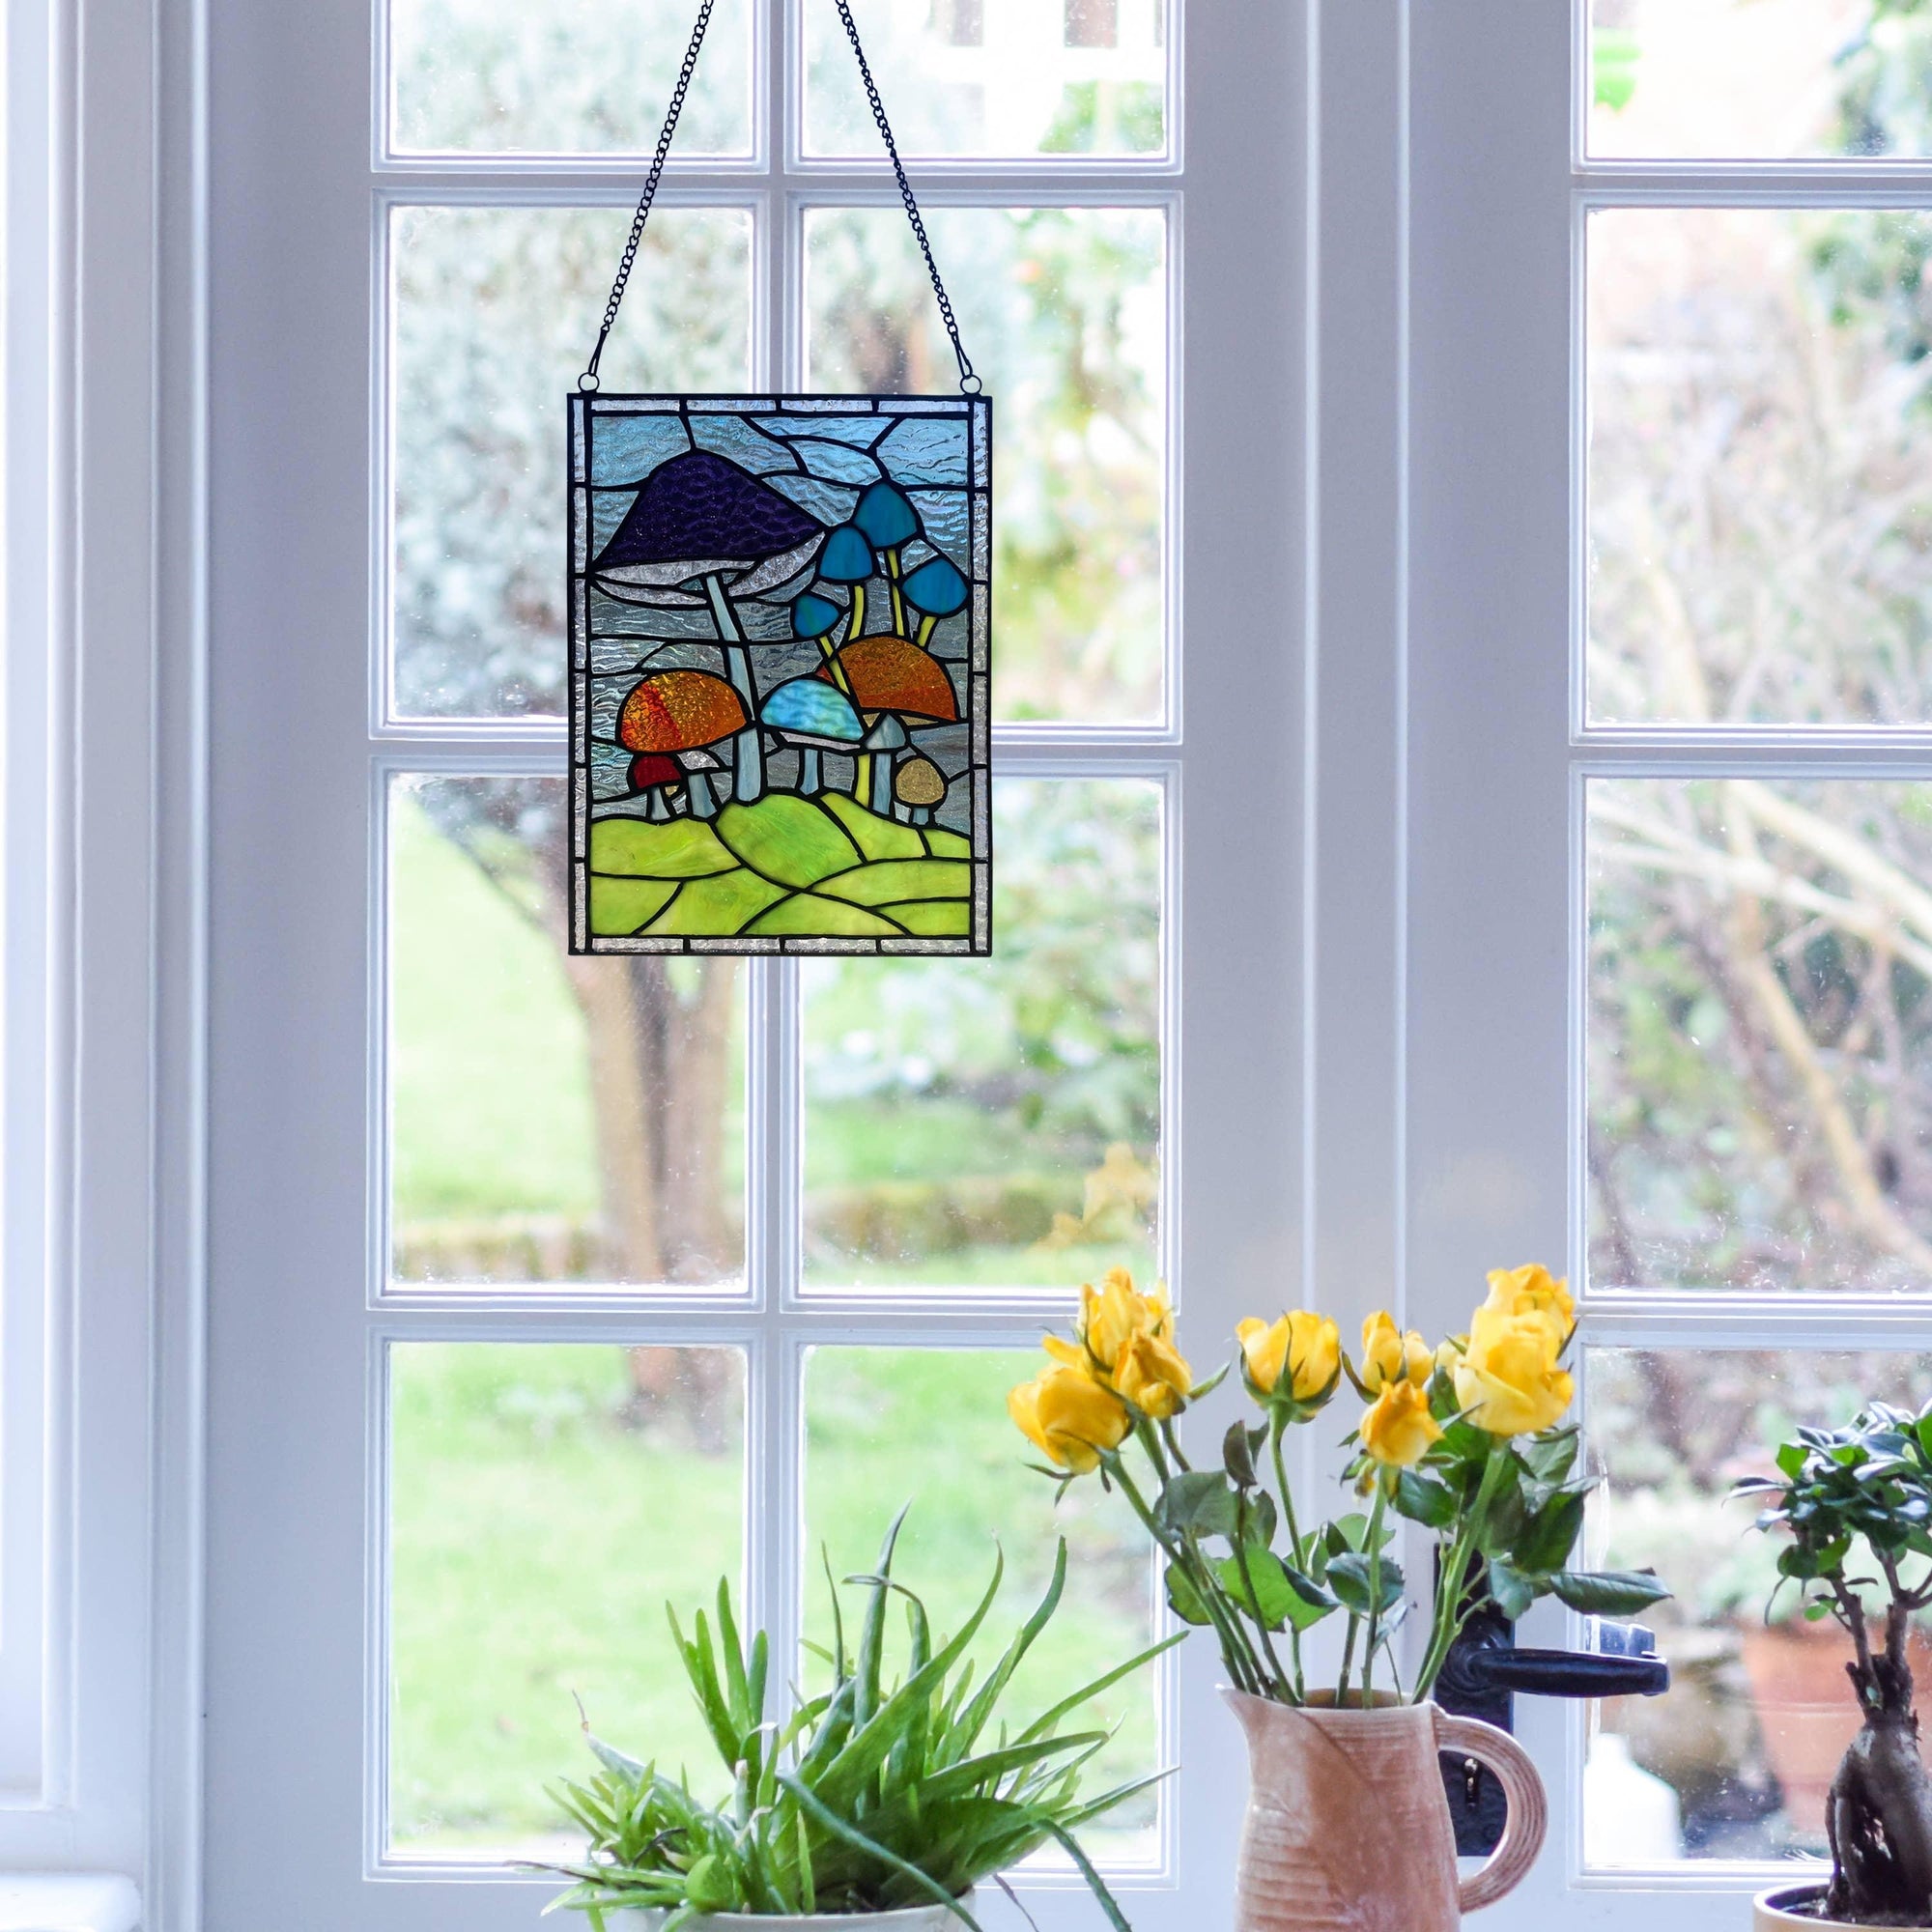 Mushroom Stained Glass Wall Hanging - Stained glass mushroom art piece displayed against a window with natural light creating vibrant colors and patterns.